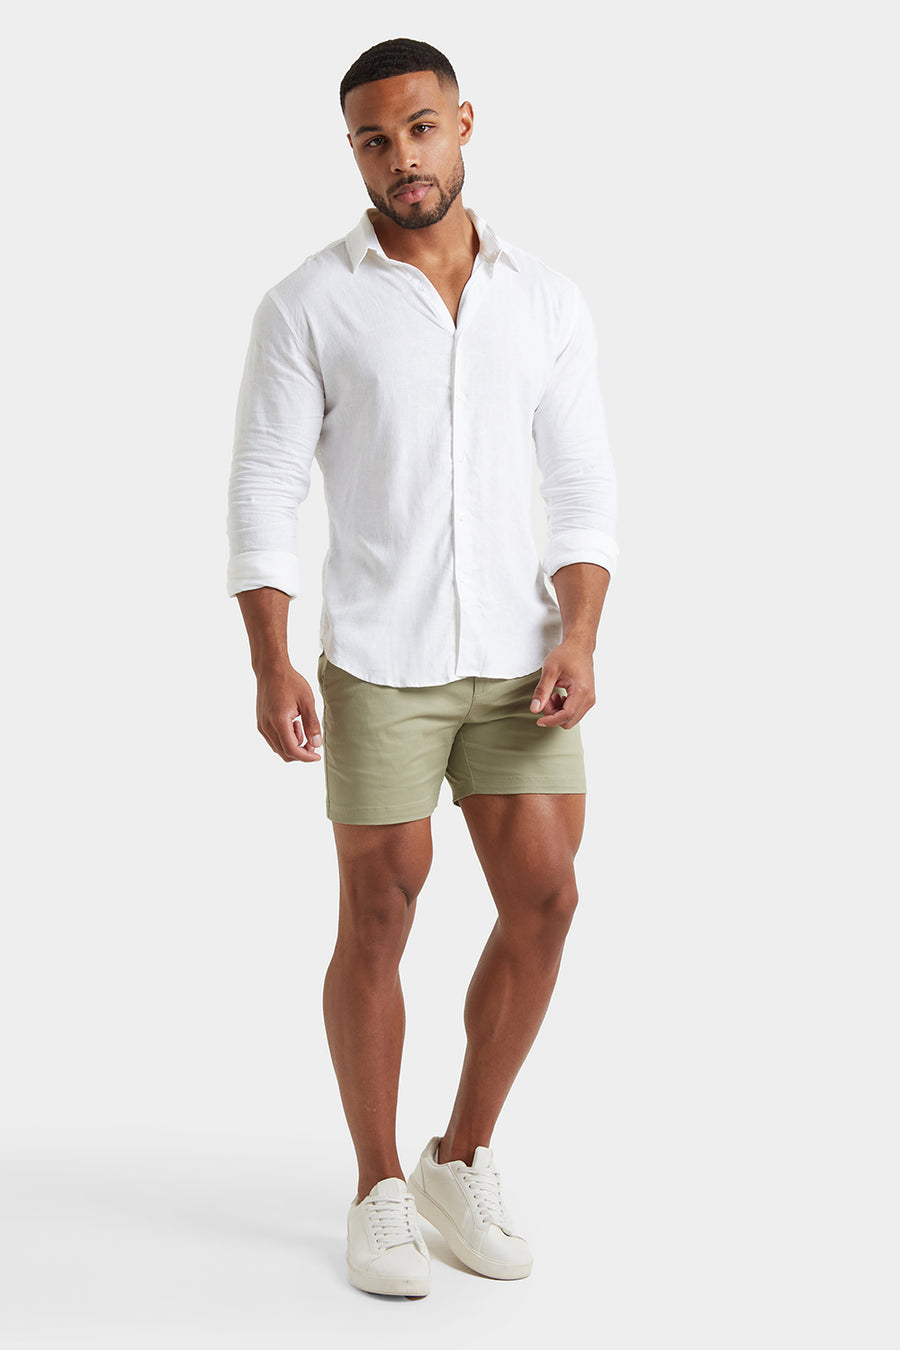 Athletic Fit Chino Shorts 5" in Sage - TAILORED ATHLETE - USA